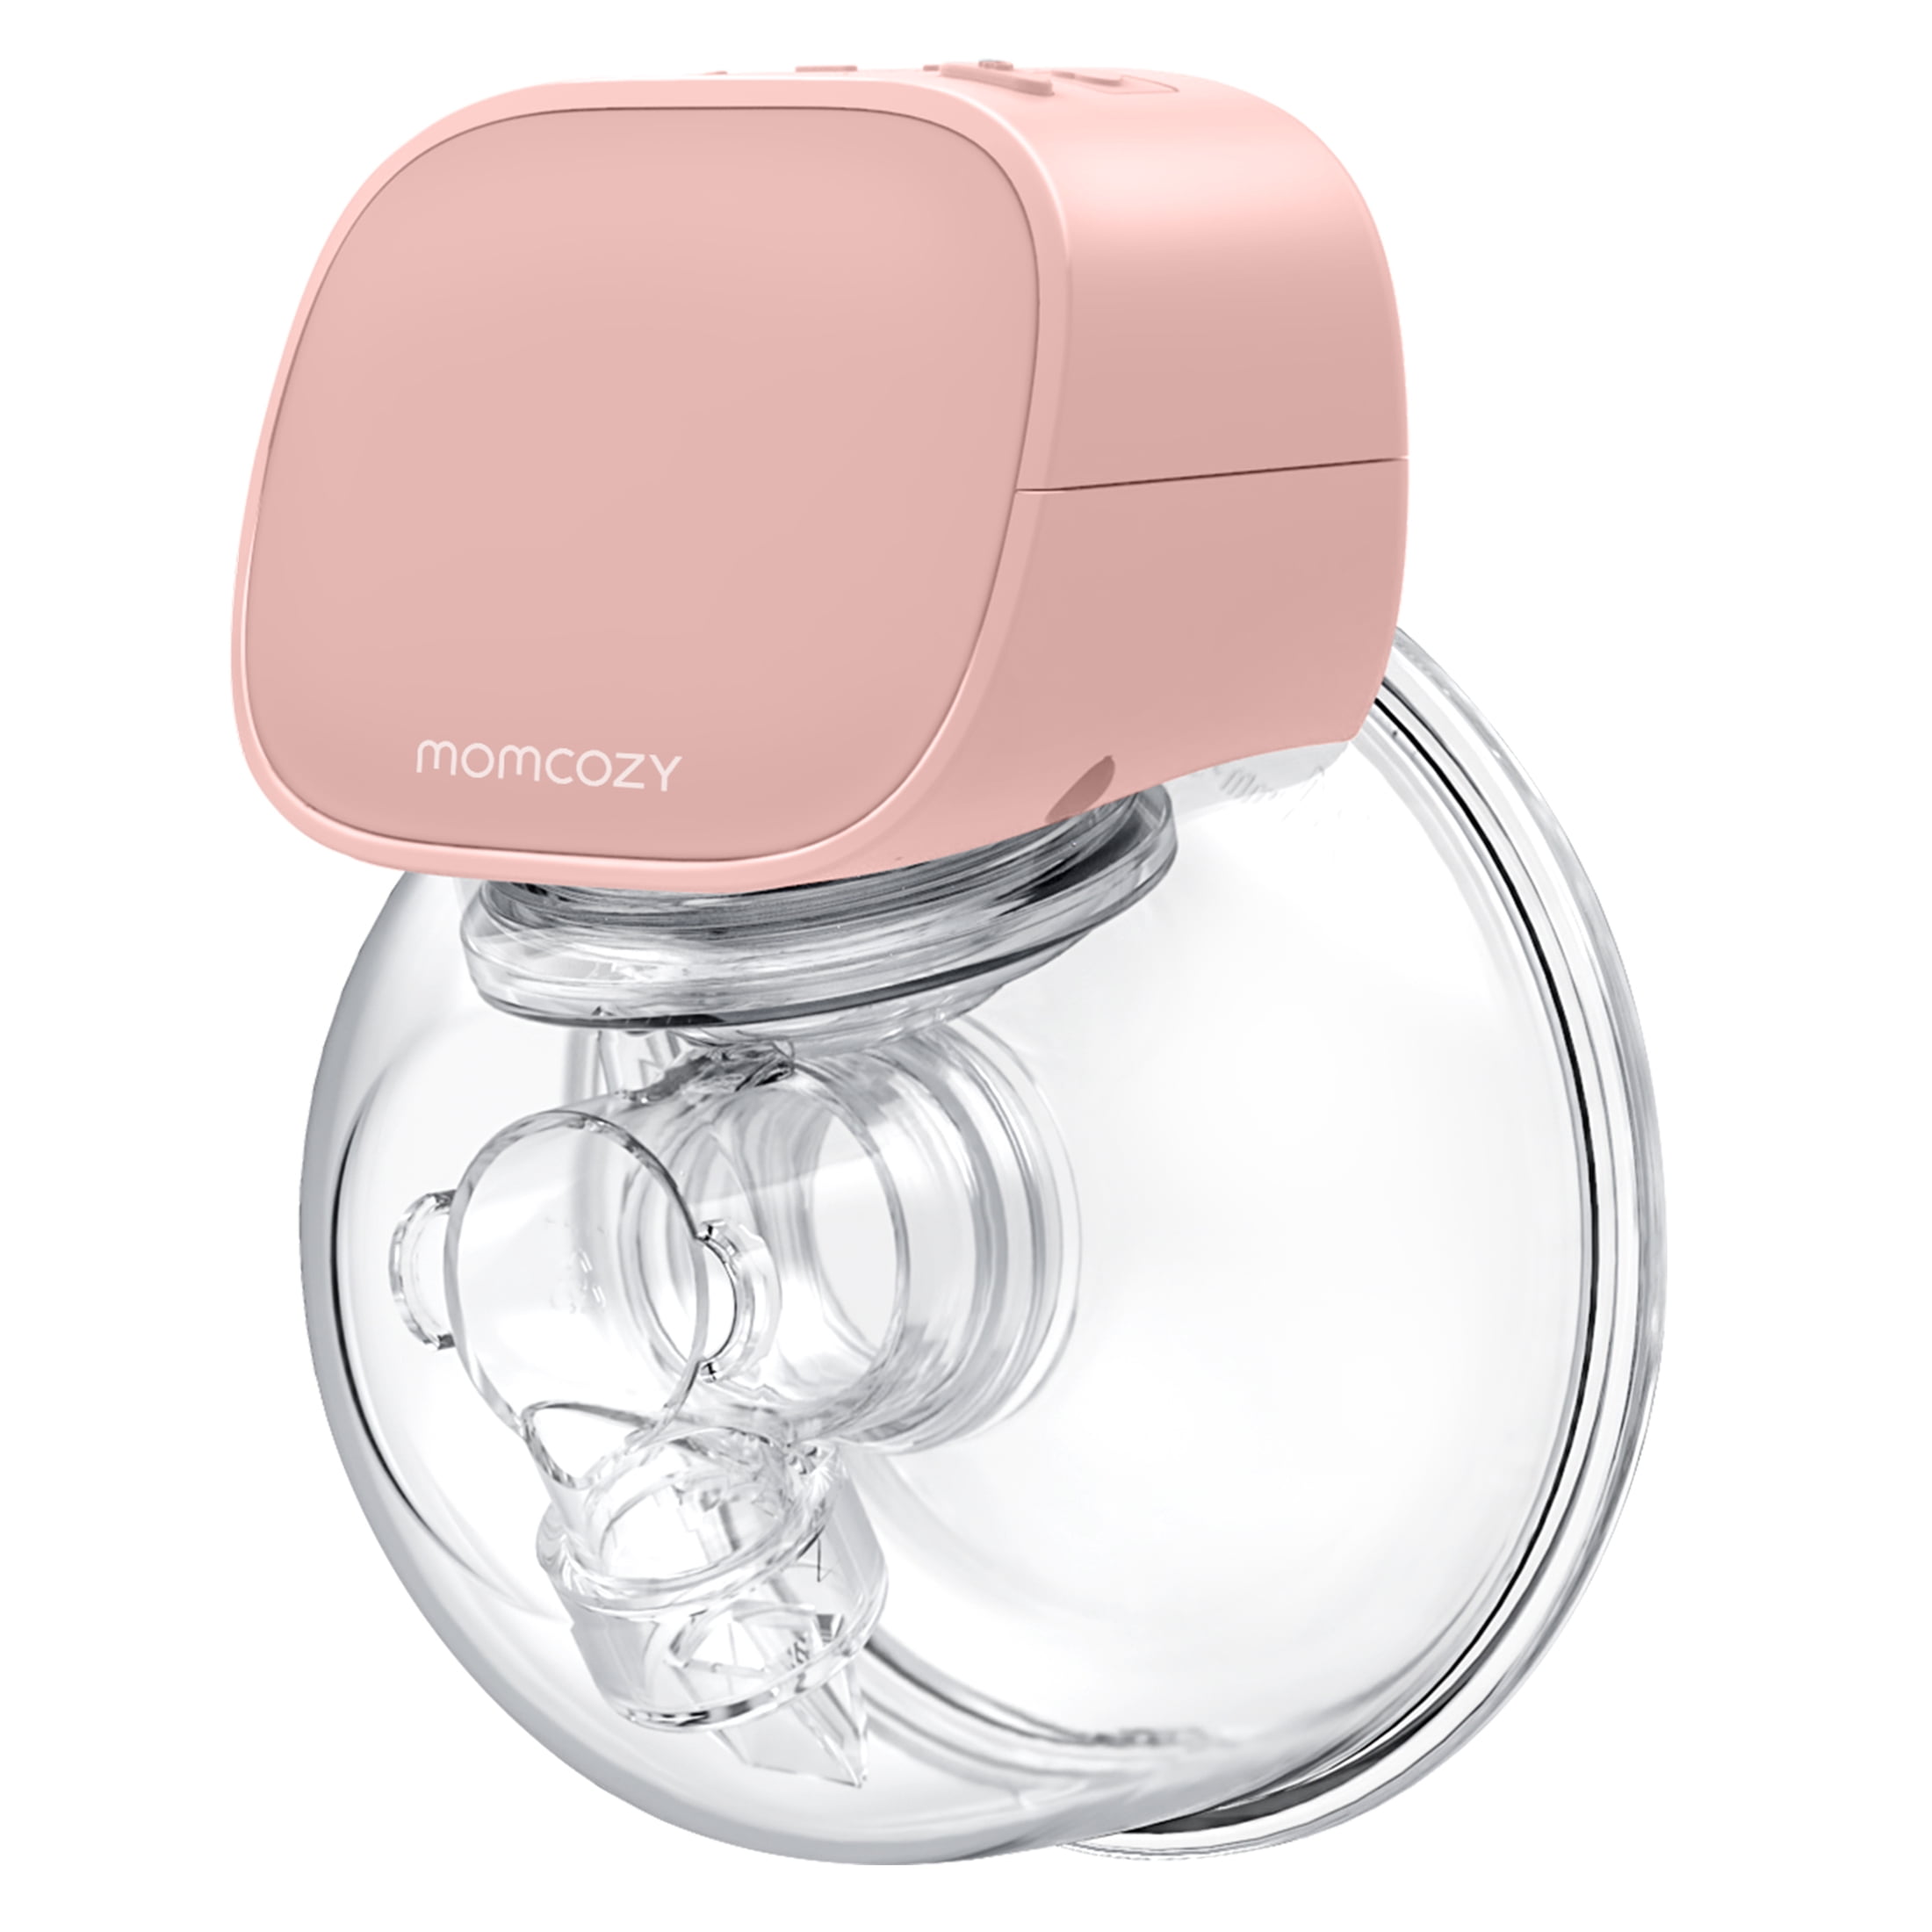 Maternity and Baby Brand Momcozy Launches Cutting-edge M5 Wearable Breast  Pump - the Ultimate Solution for Busy Moms